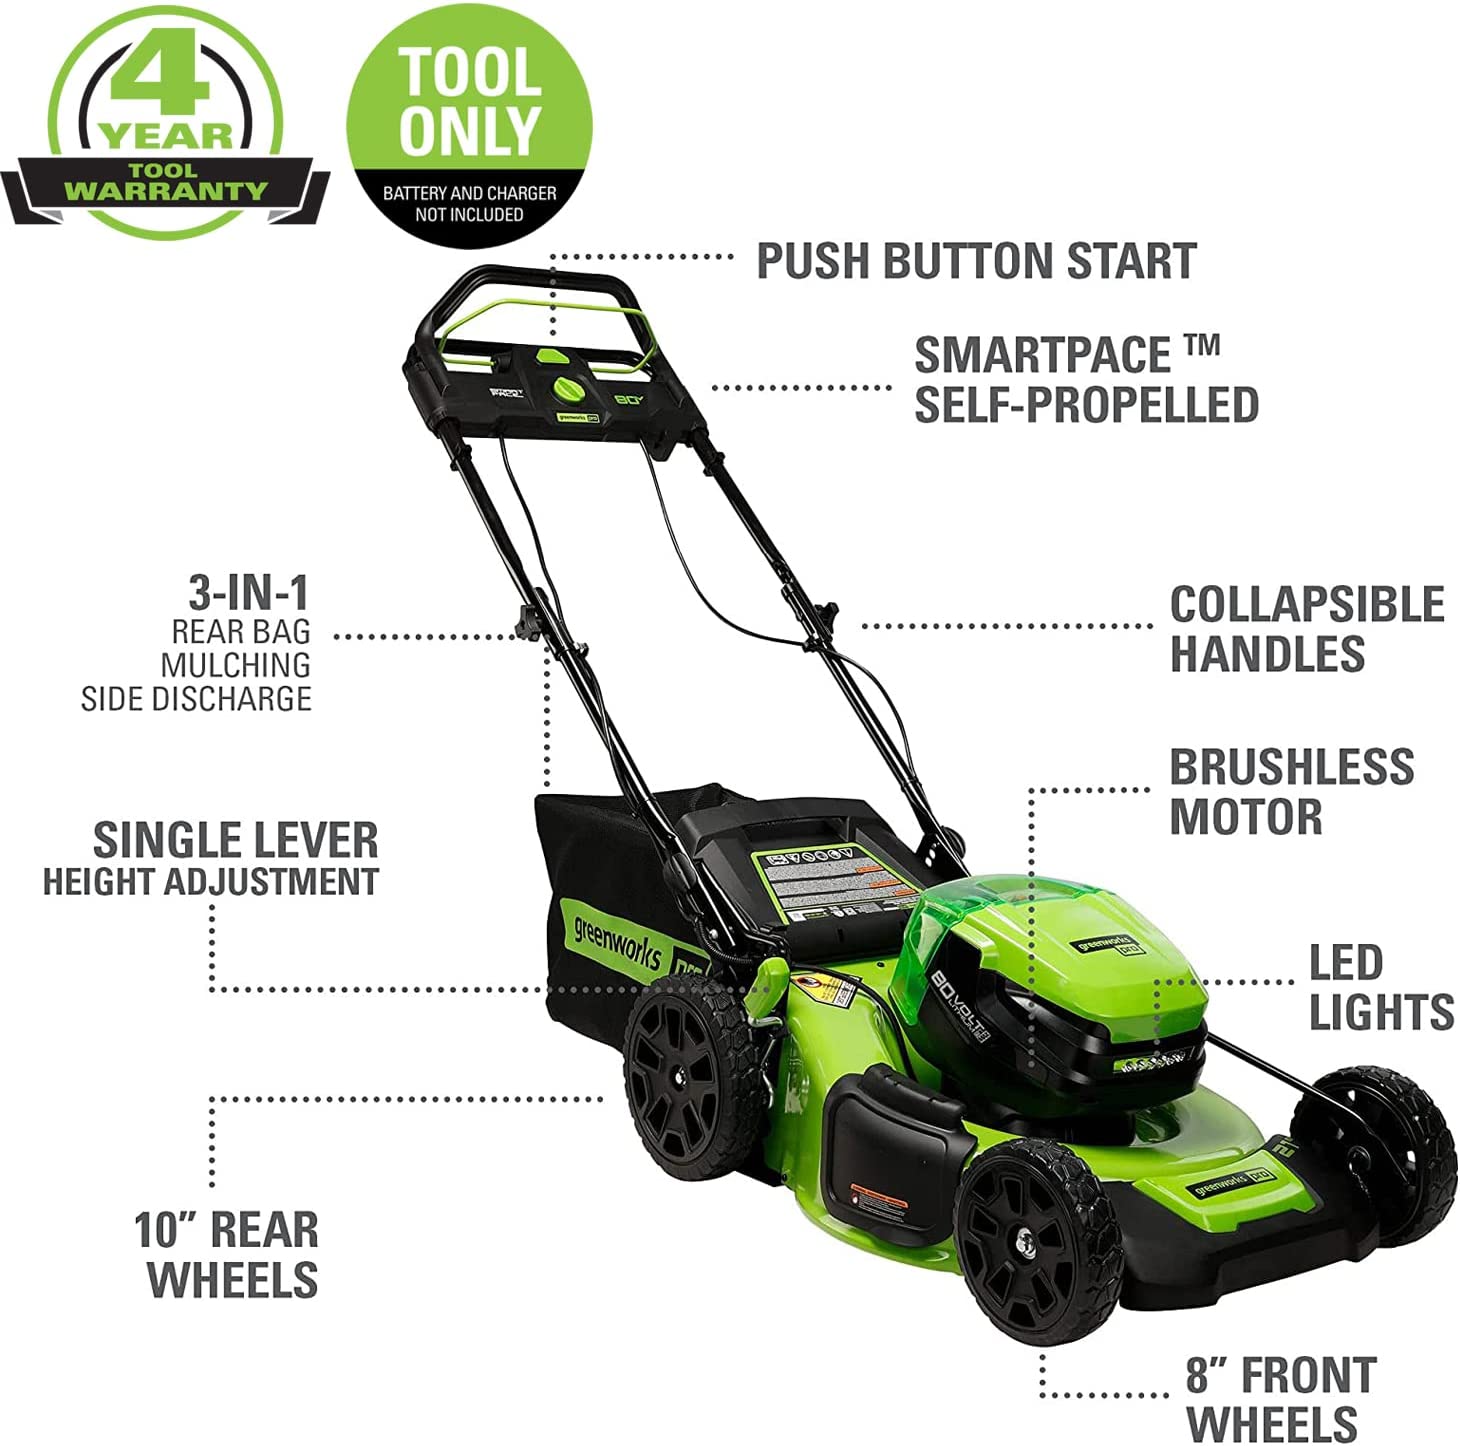 Greenworks GW2534102T Pro 80V 21" Brushless SmartPace Self-Propelled Electric Lawn Mower, Tool-Only